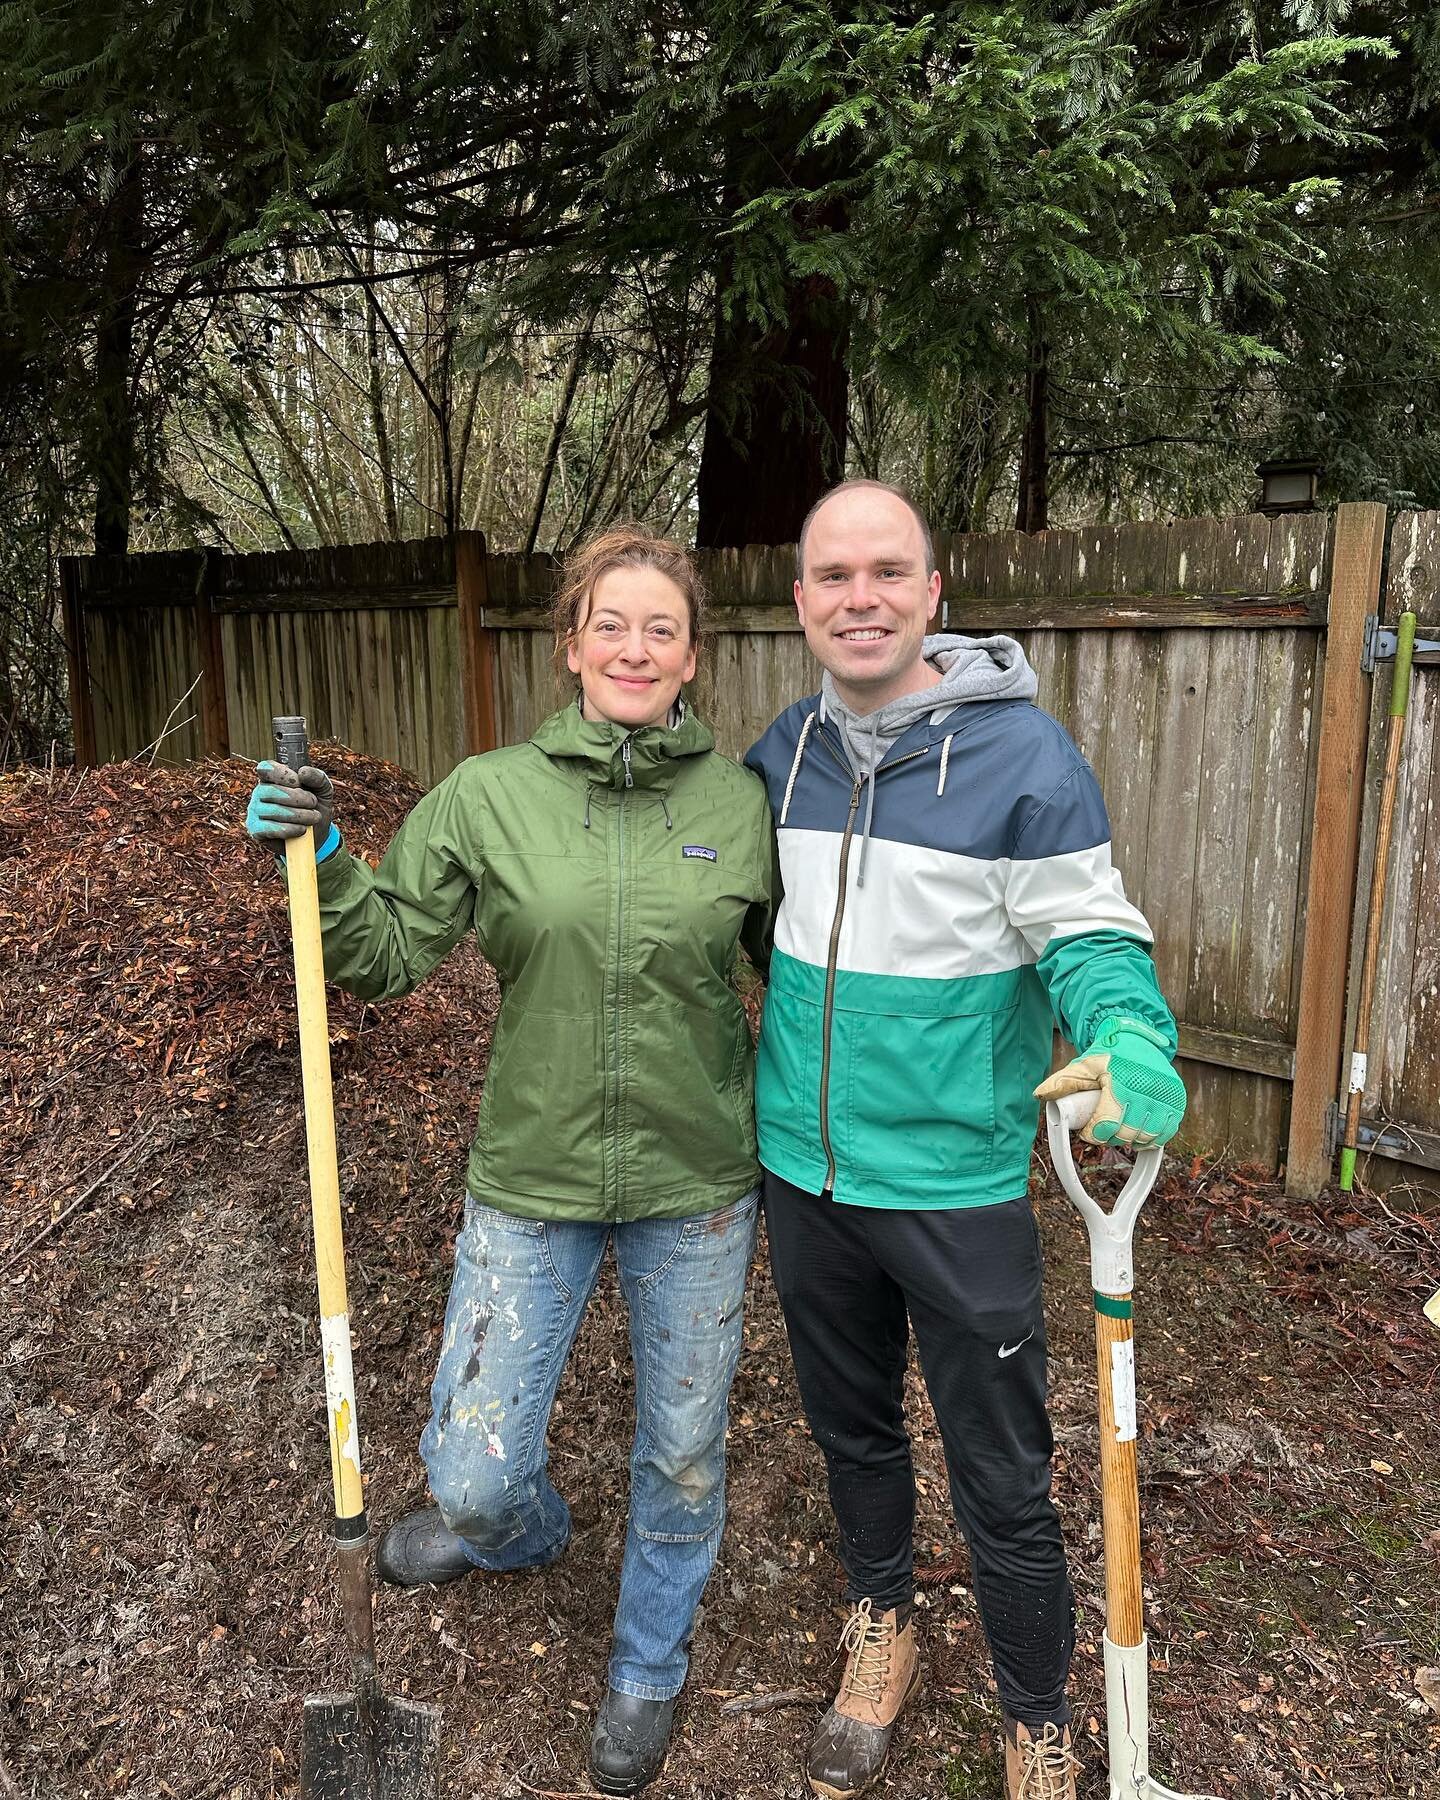 Spent a few hours with @daciafororegon, @cityoftigard, @tualatinriverkeepers, and almost two dozen volunteers working on the trails in Dirksen Nature Park to honor the Martin Luther King Jr. Day of Service ❤️